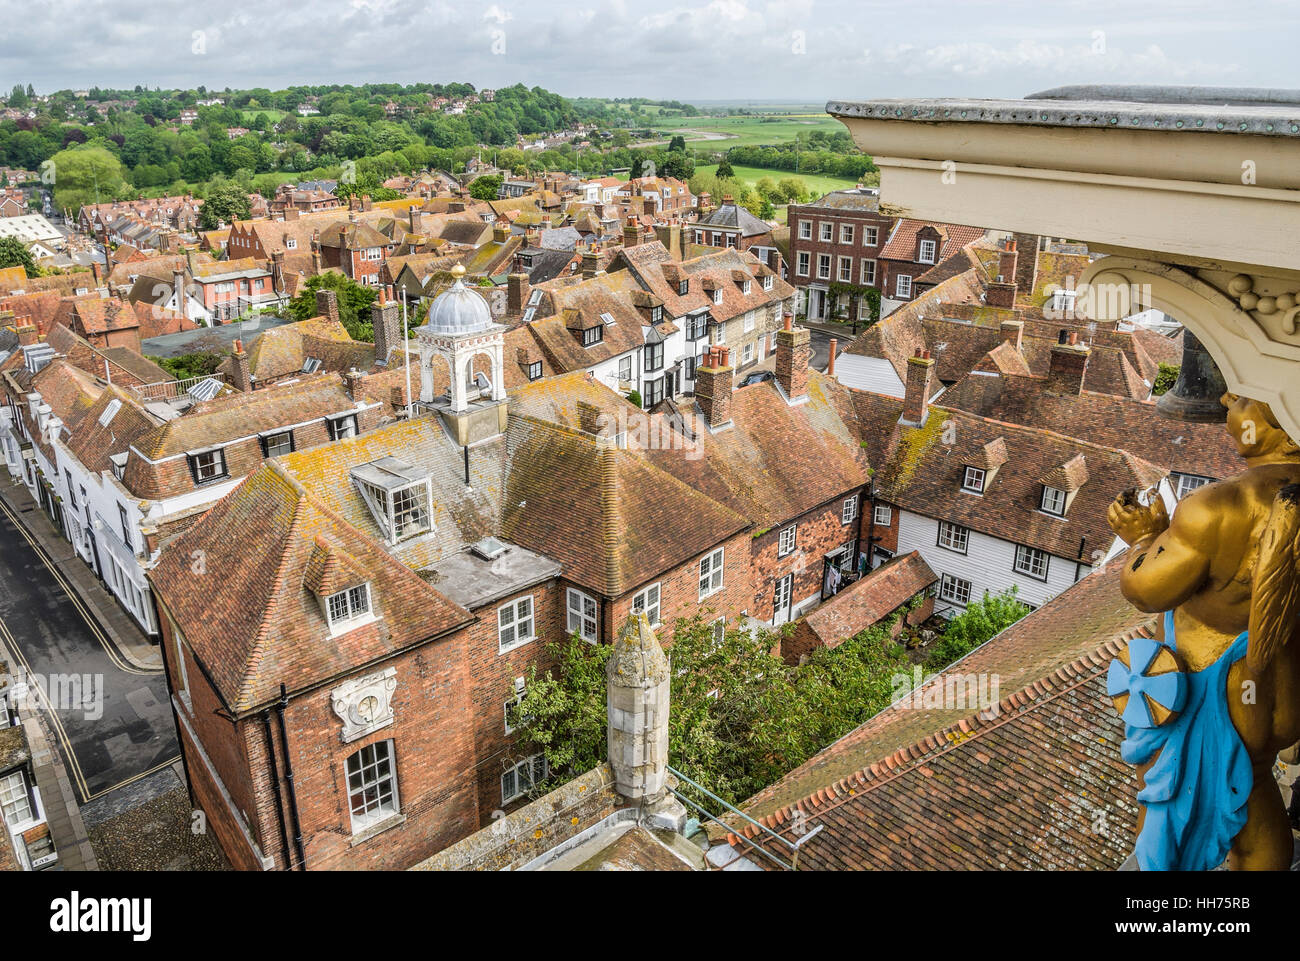 Historical town center of Rye, in East Sussex, England Stock Photo